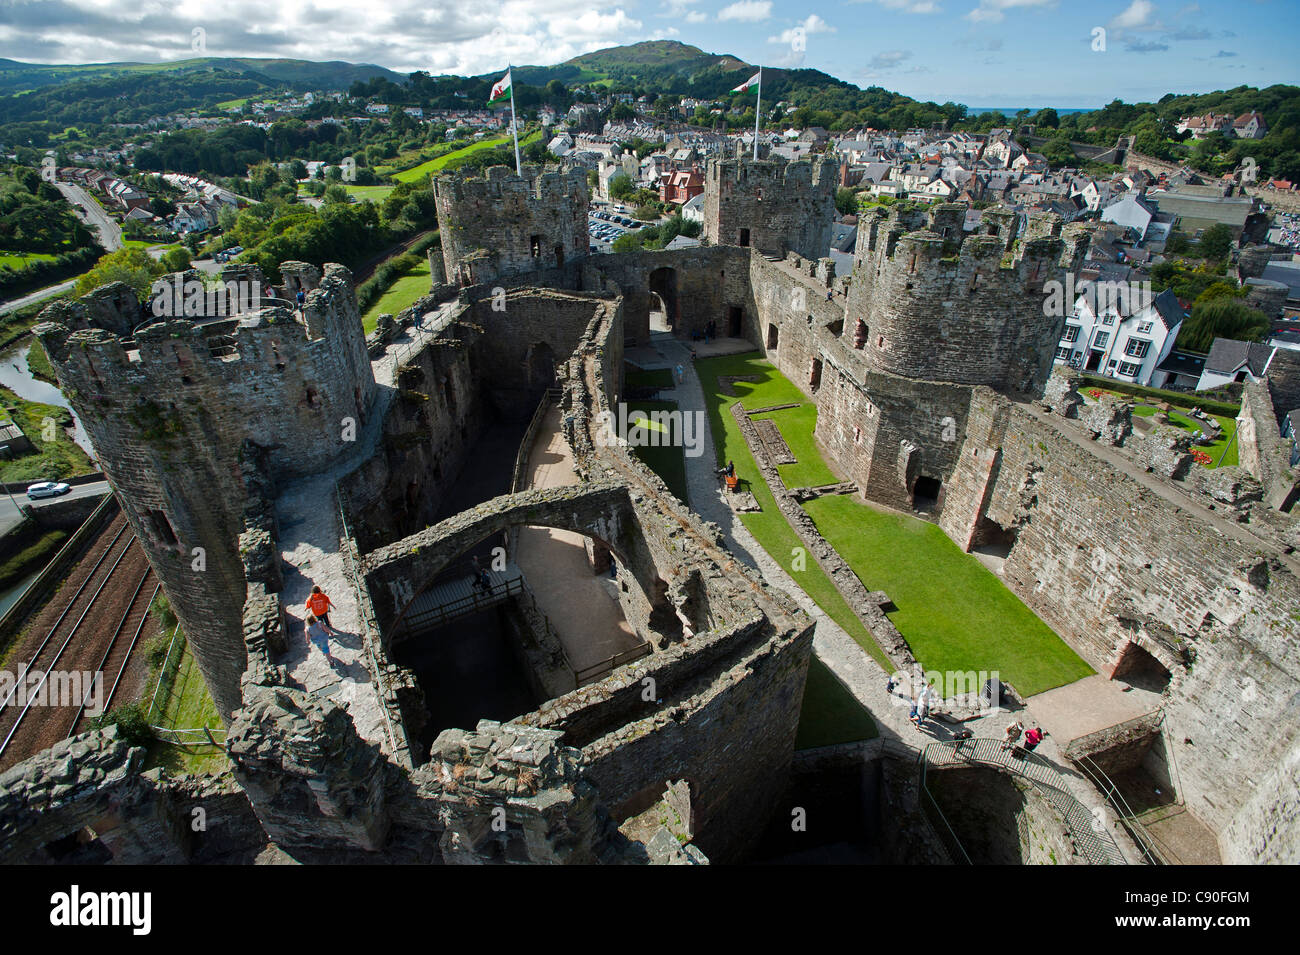 Conwy Castle in Conwy, Wales, UK Stockfoto